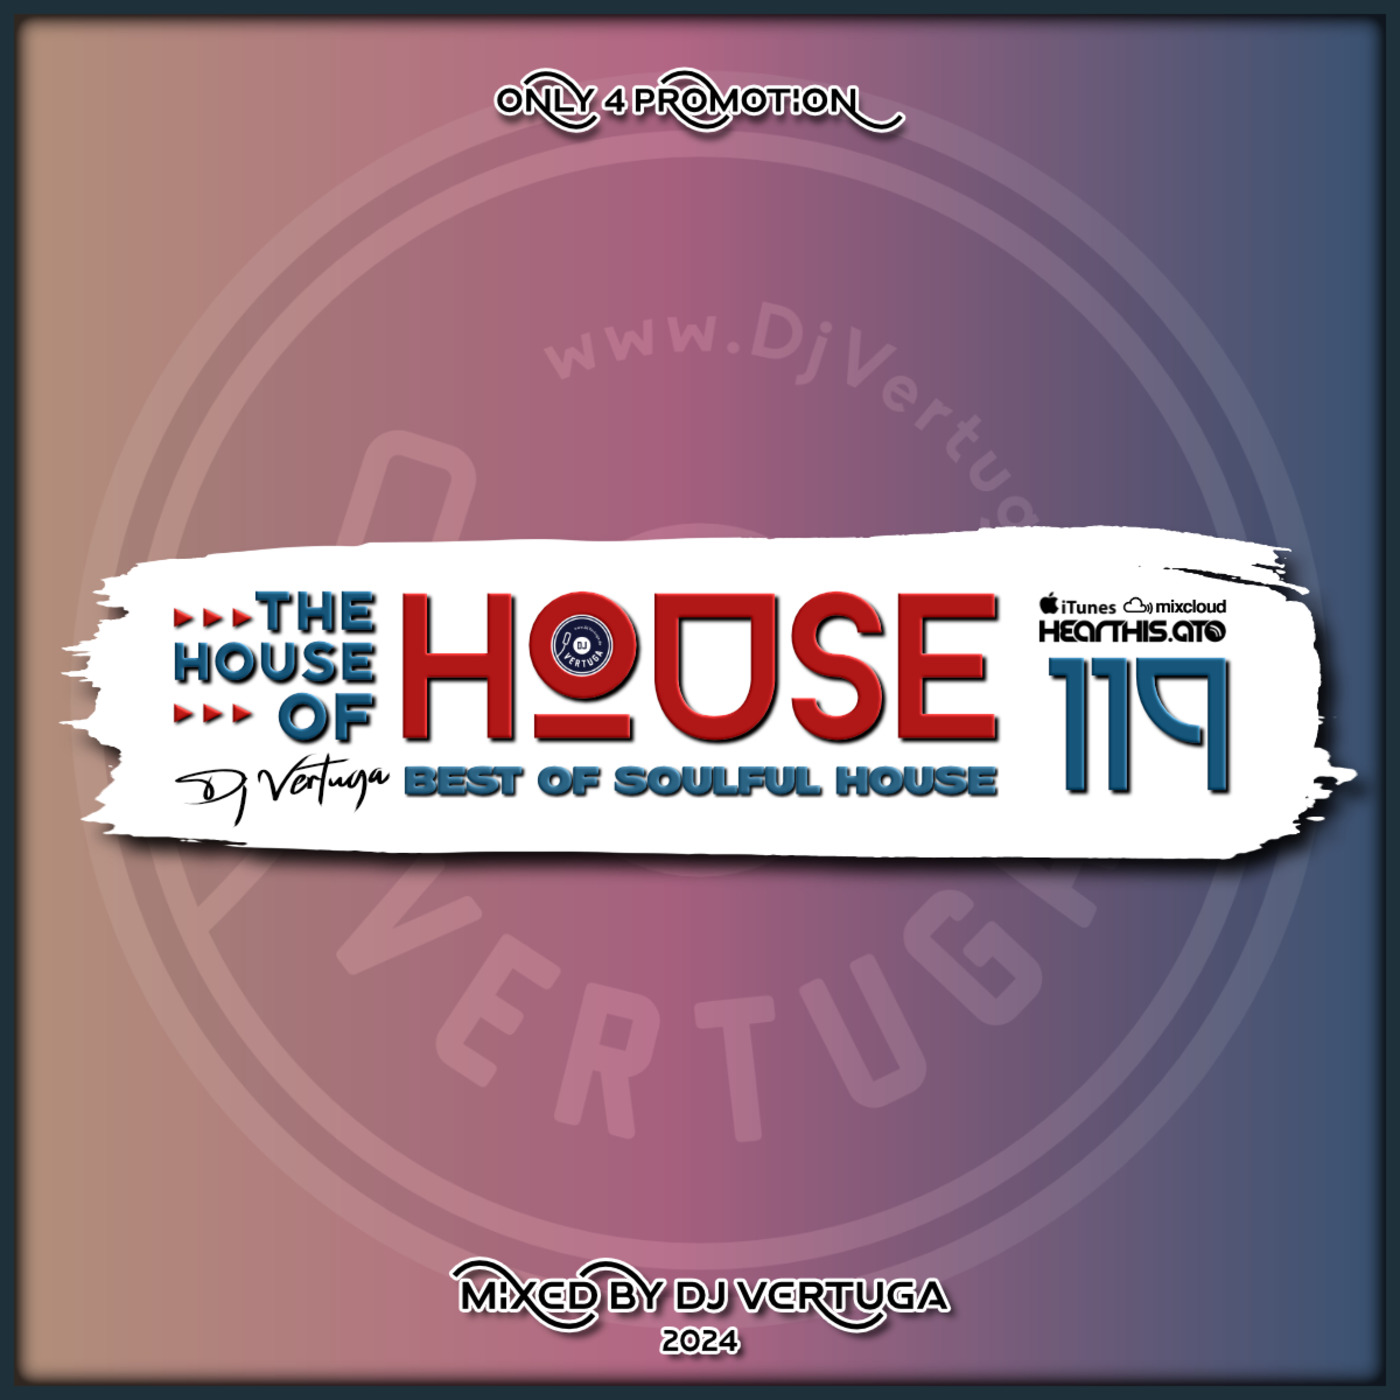 Dj Vertuga - The House of House vol. 119 (Best of Soulful House)